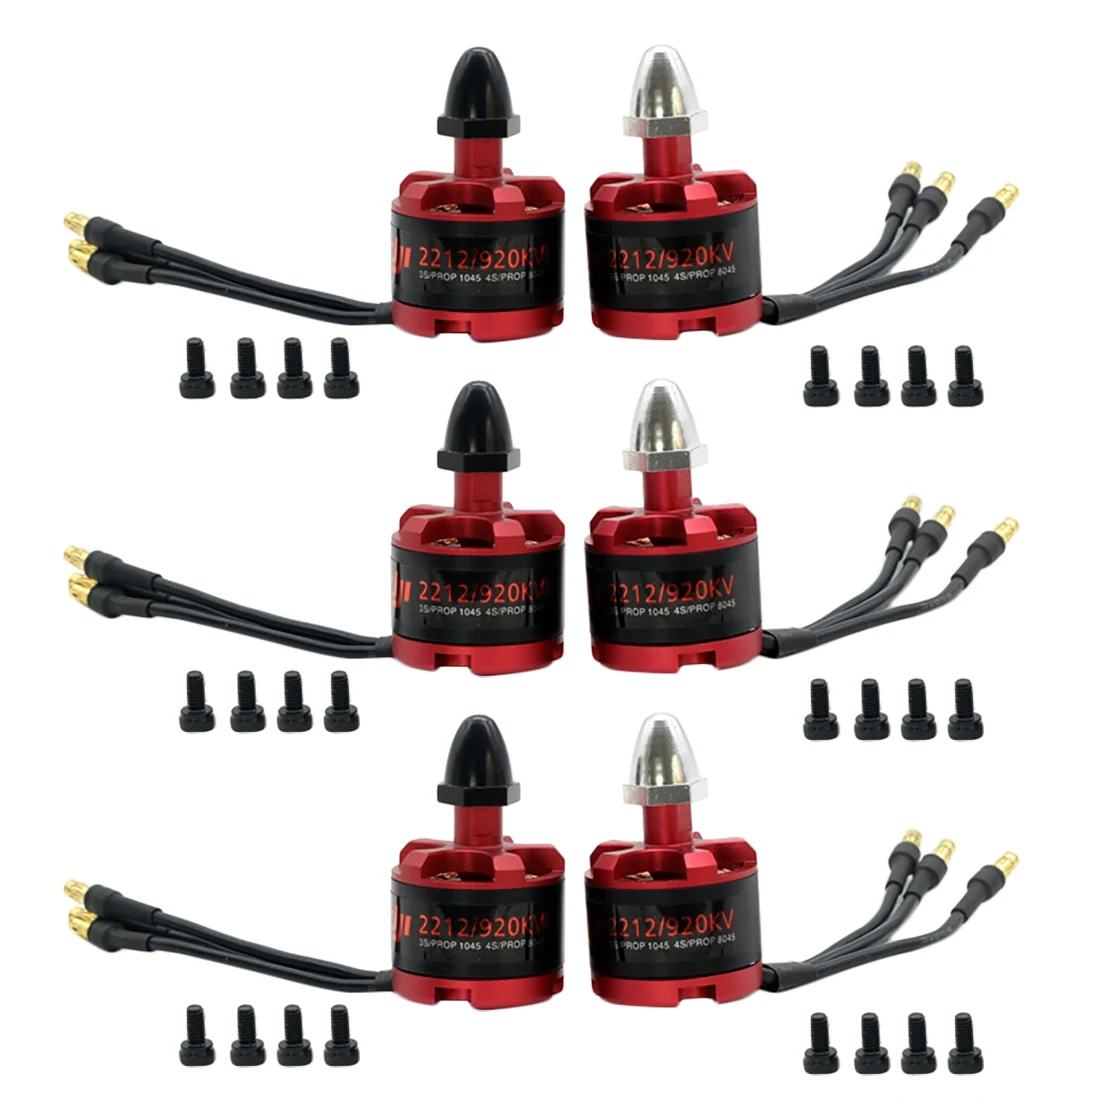 

2212 920KV Brushless Motor Self Locking for DJI F330 F450 F550 Model Aircraft Motor Accessories Four-Axis Six-Axis 6PCS